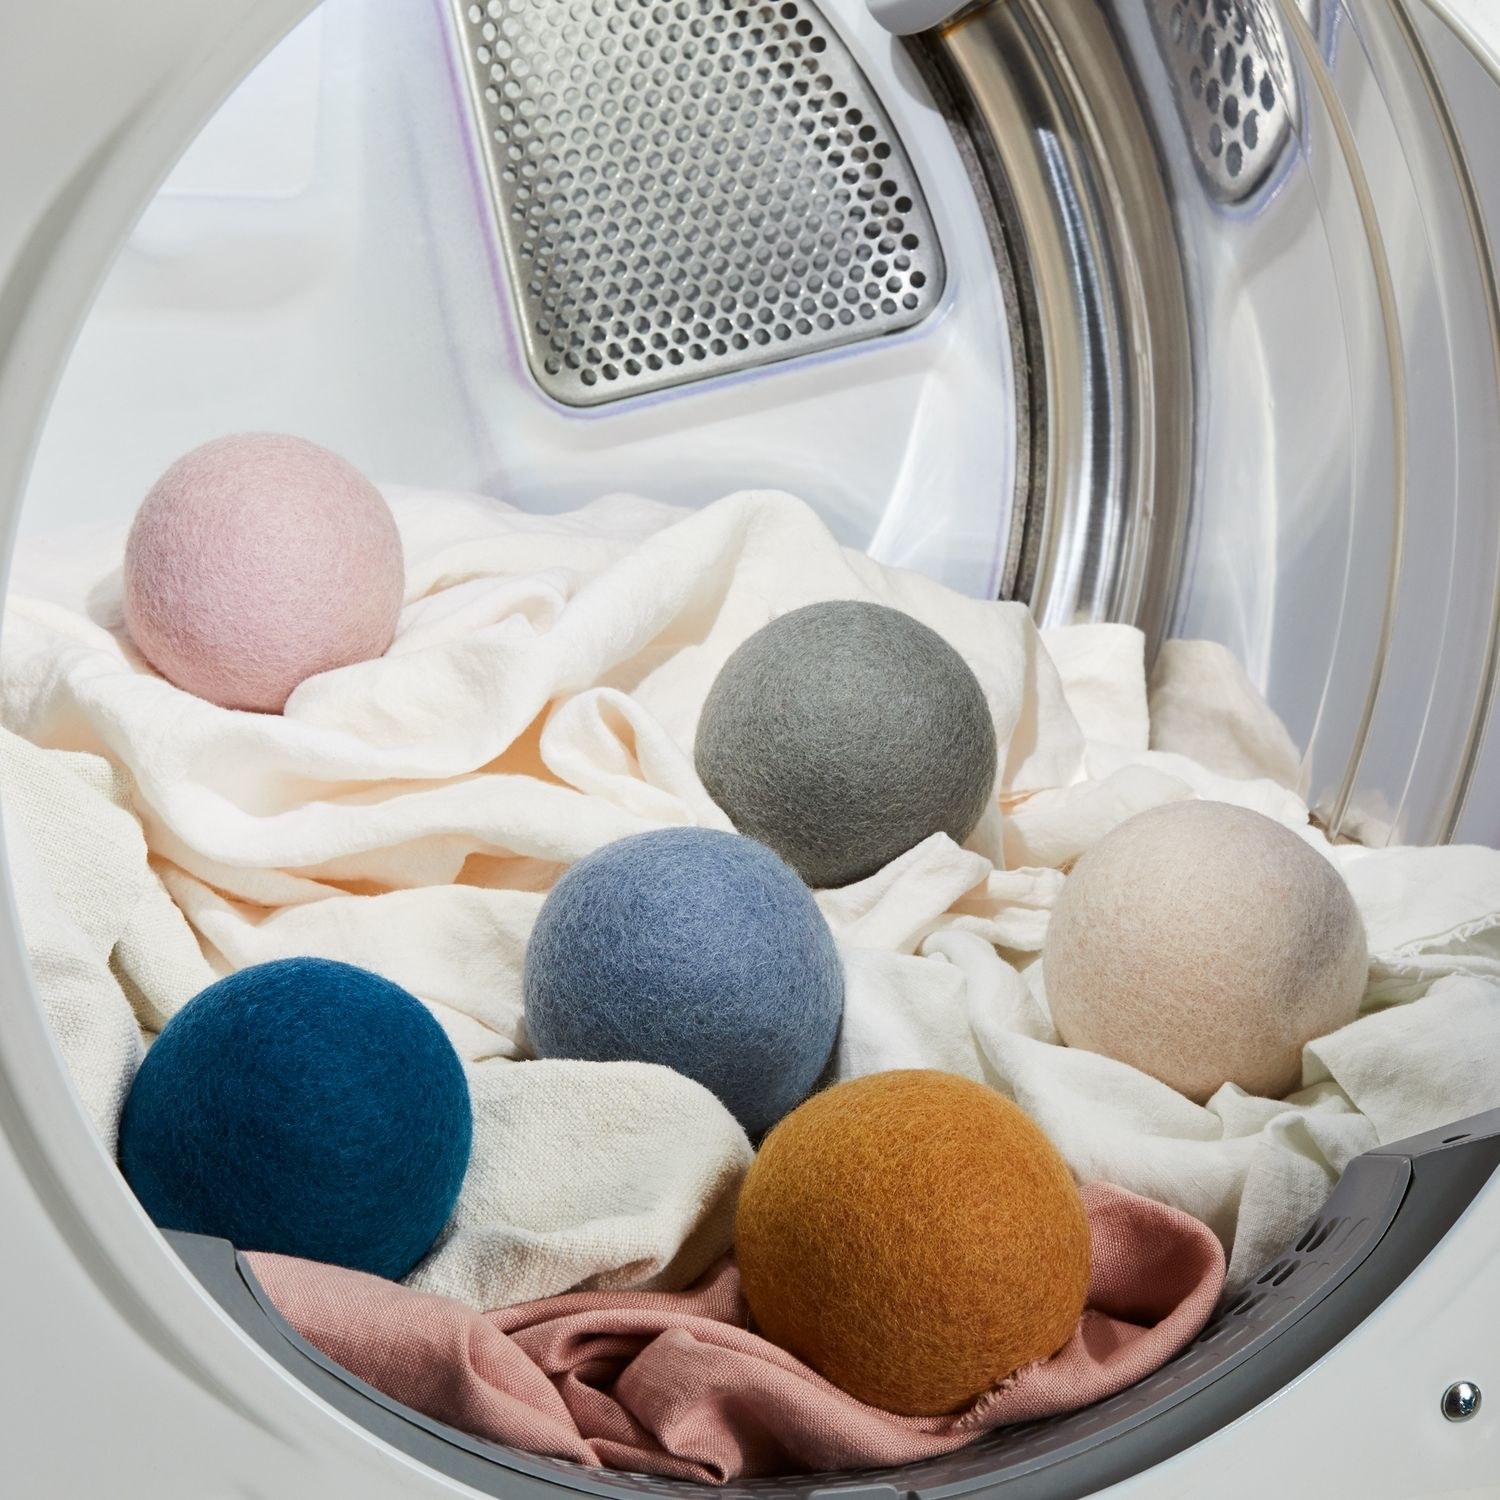 The dryer balls in a dryer